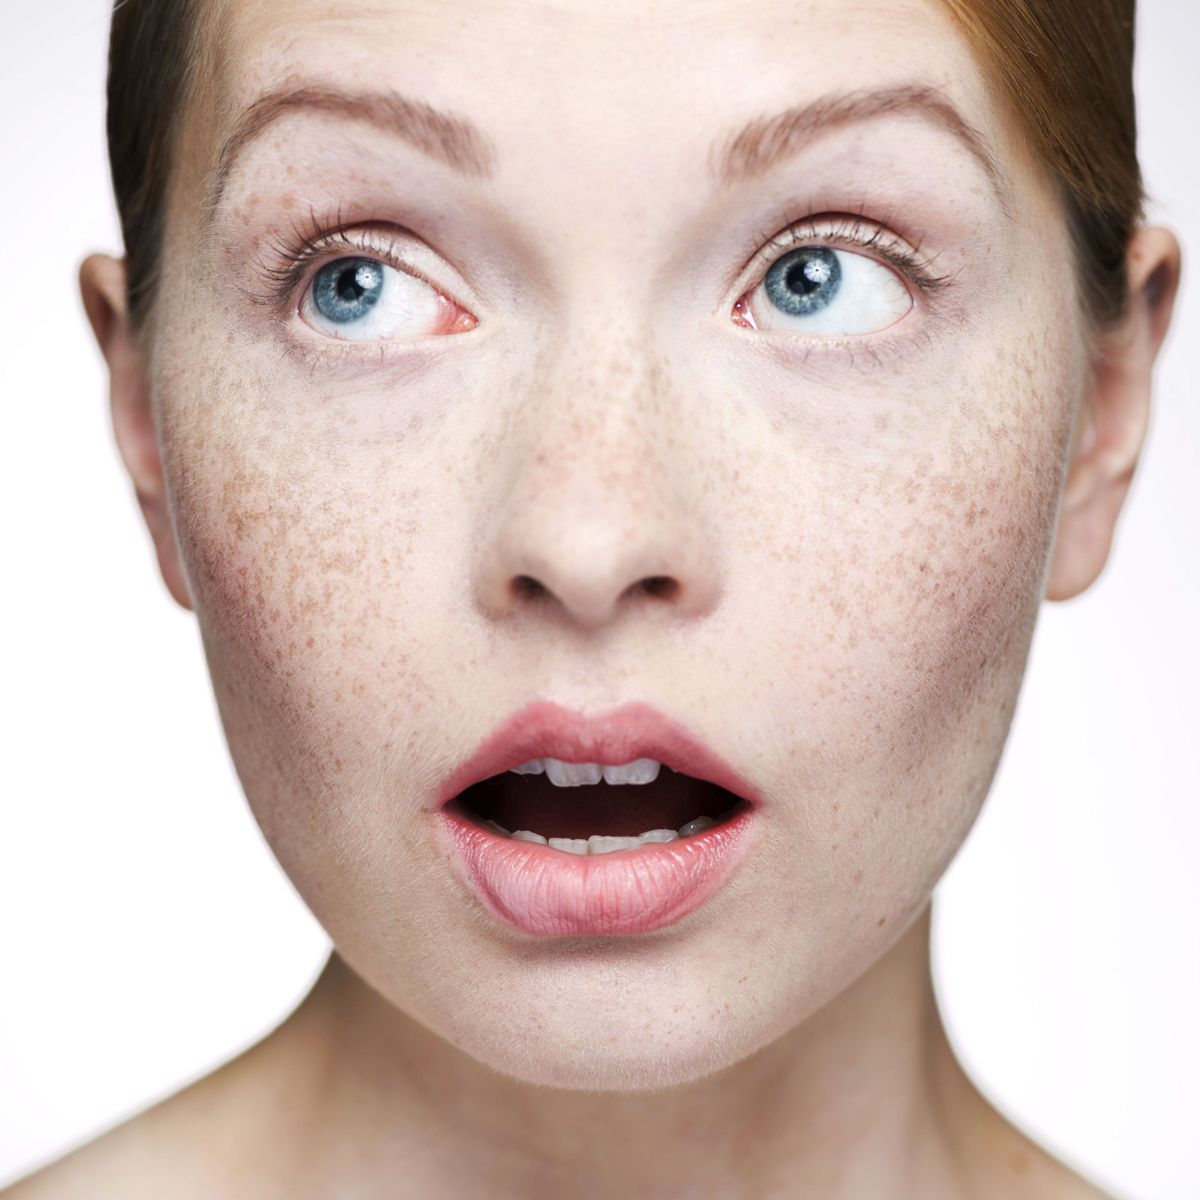 The 8 Worst Things You Can Do to Your Skin